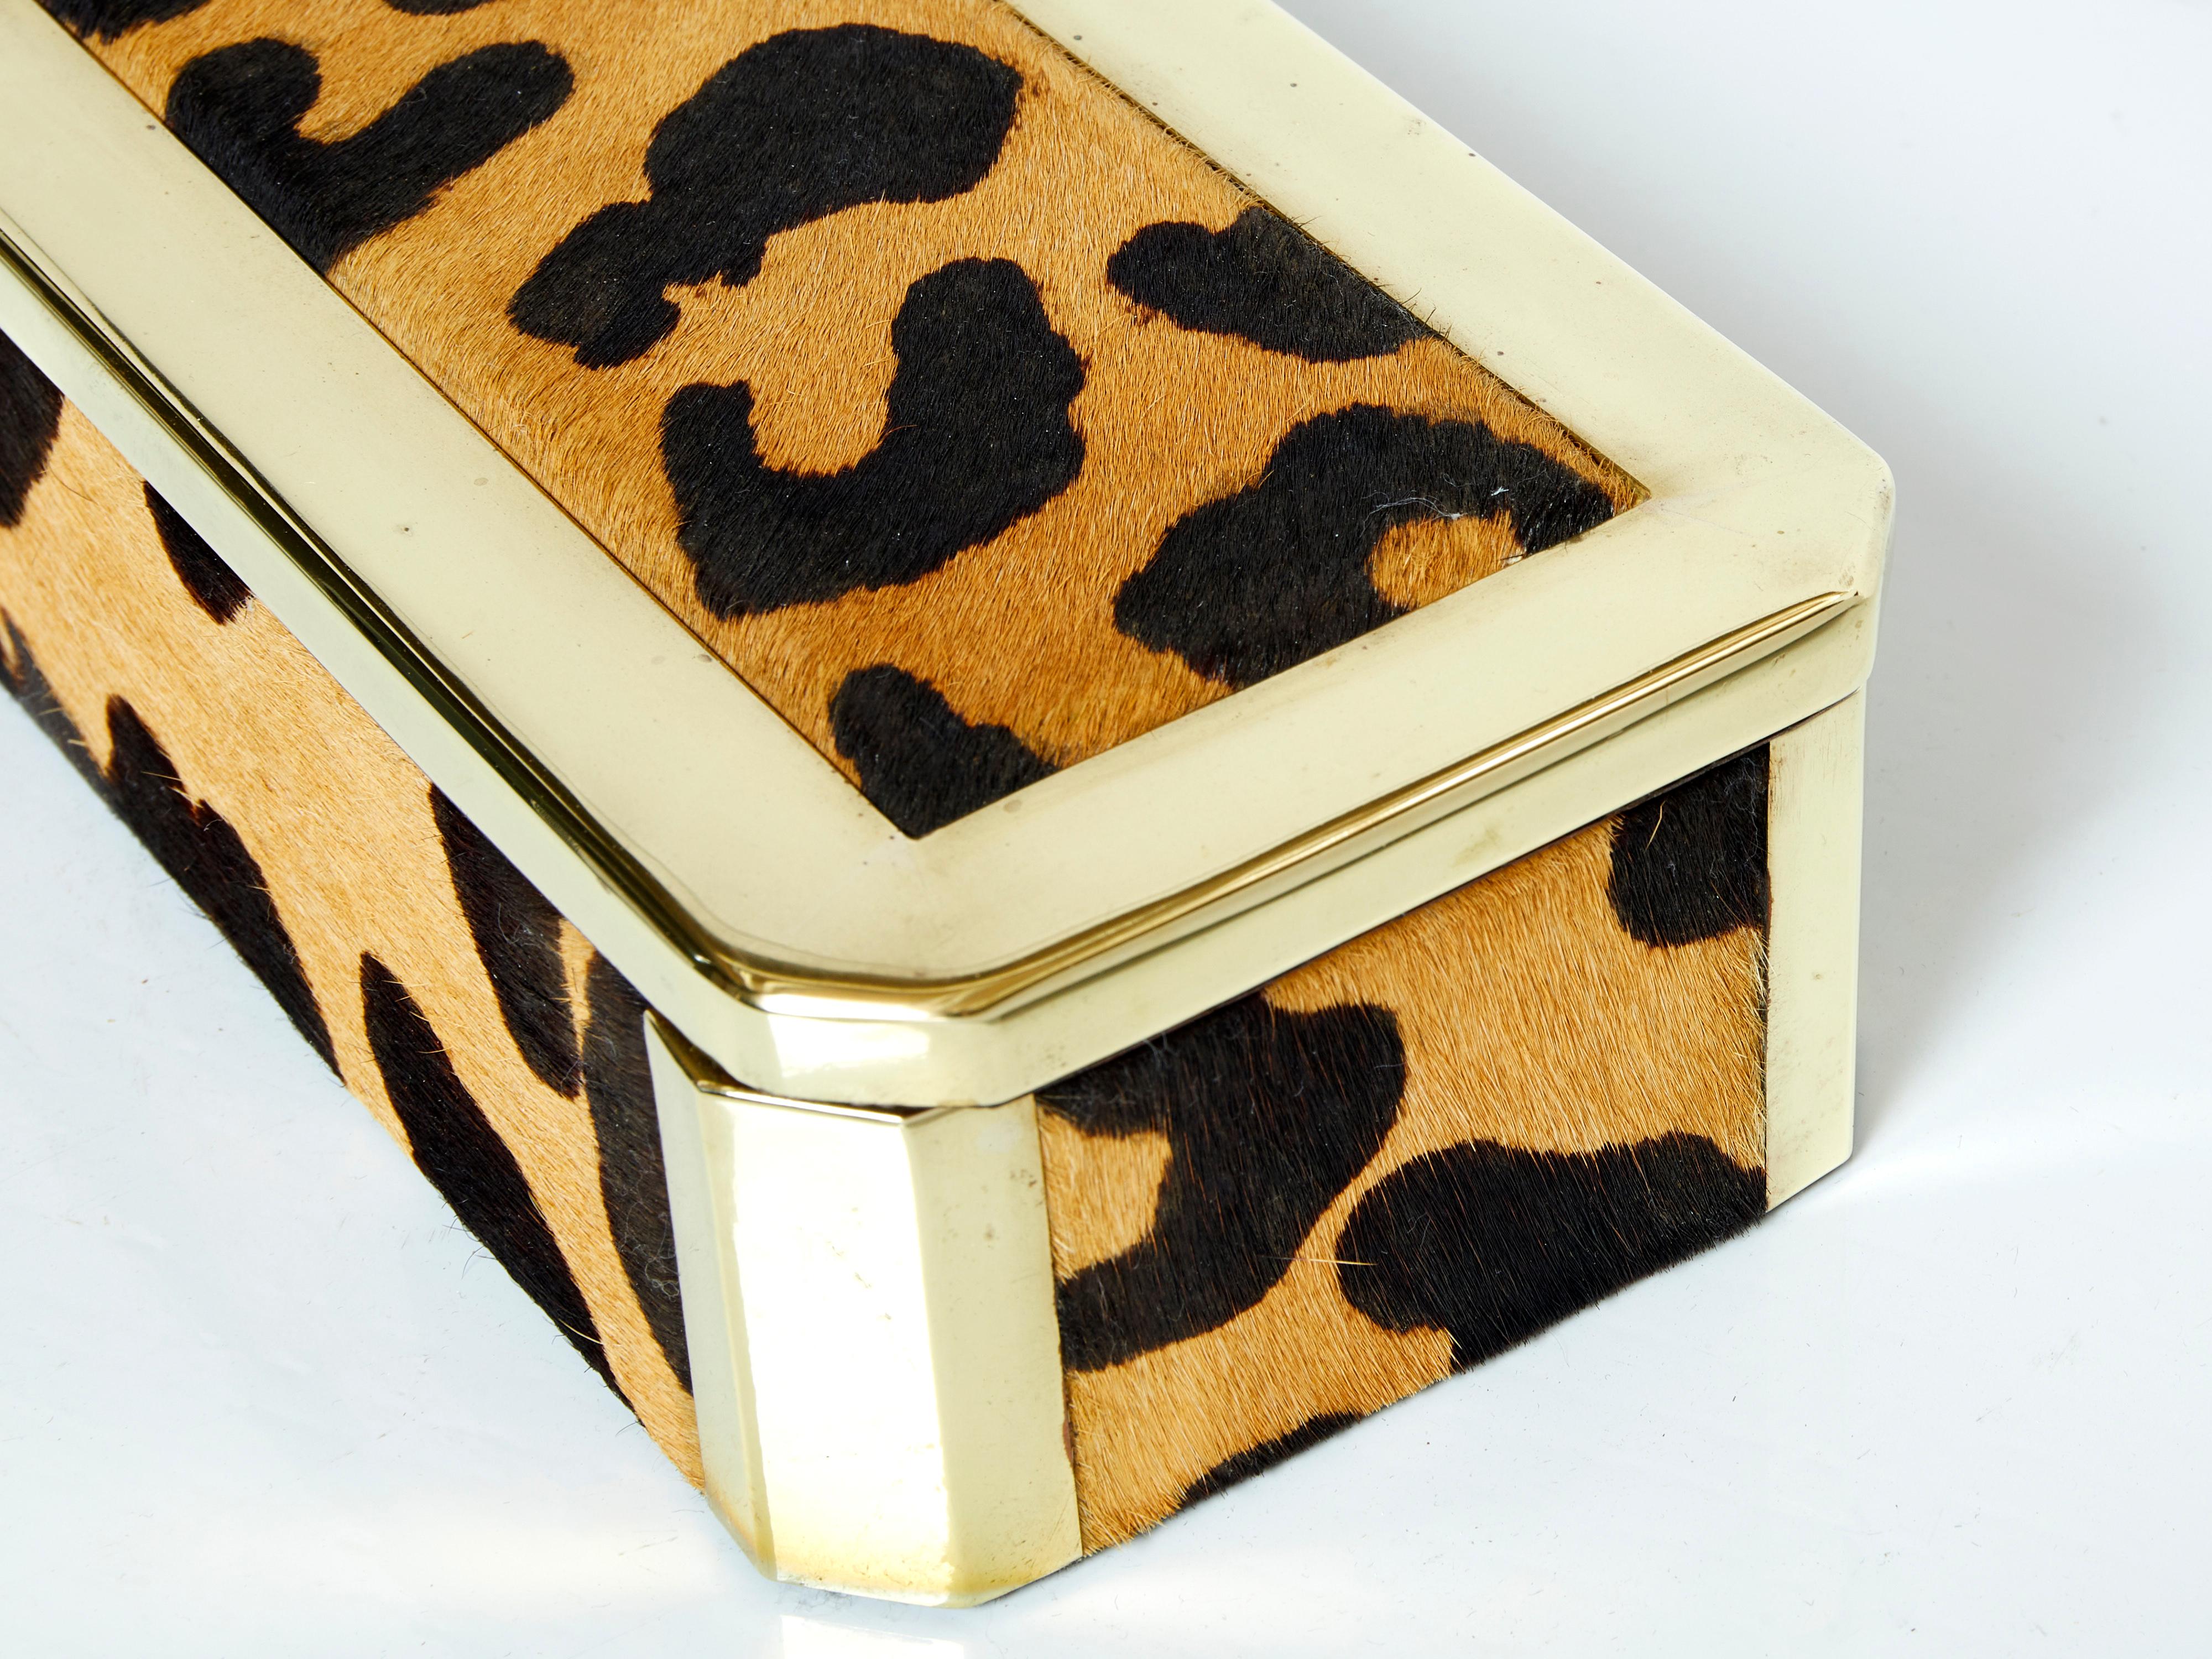 Beautiful mid-century box made in Italy in the late 1970s. This brass jewellery or make-up box is covered by leopard fur, with burlwood veneer inside. The mix of brass and leopard fur is really nice, and typical of the lavish 1970s Italian style. A